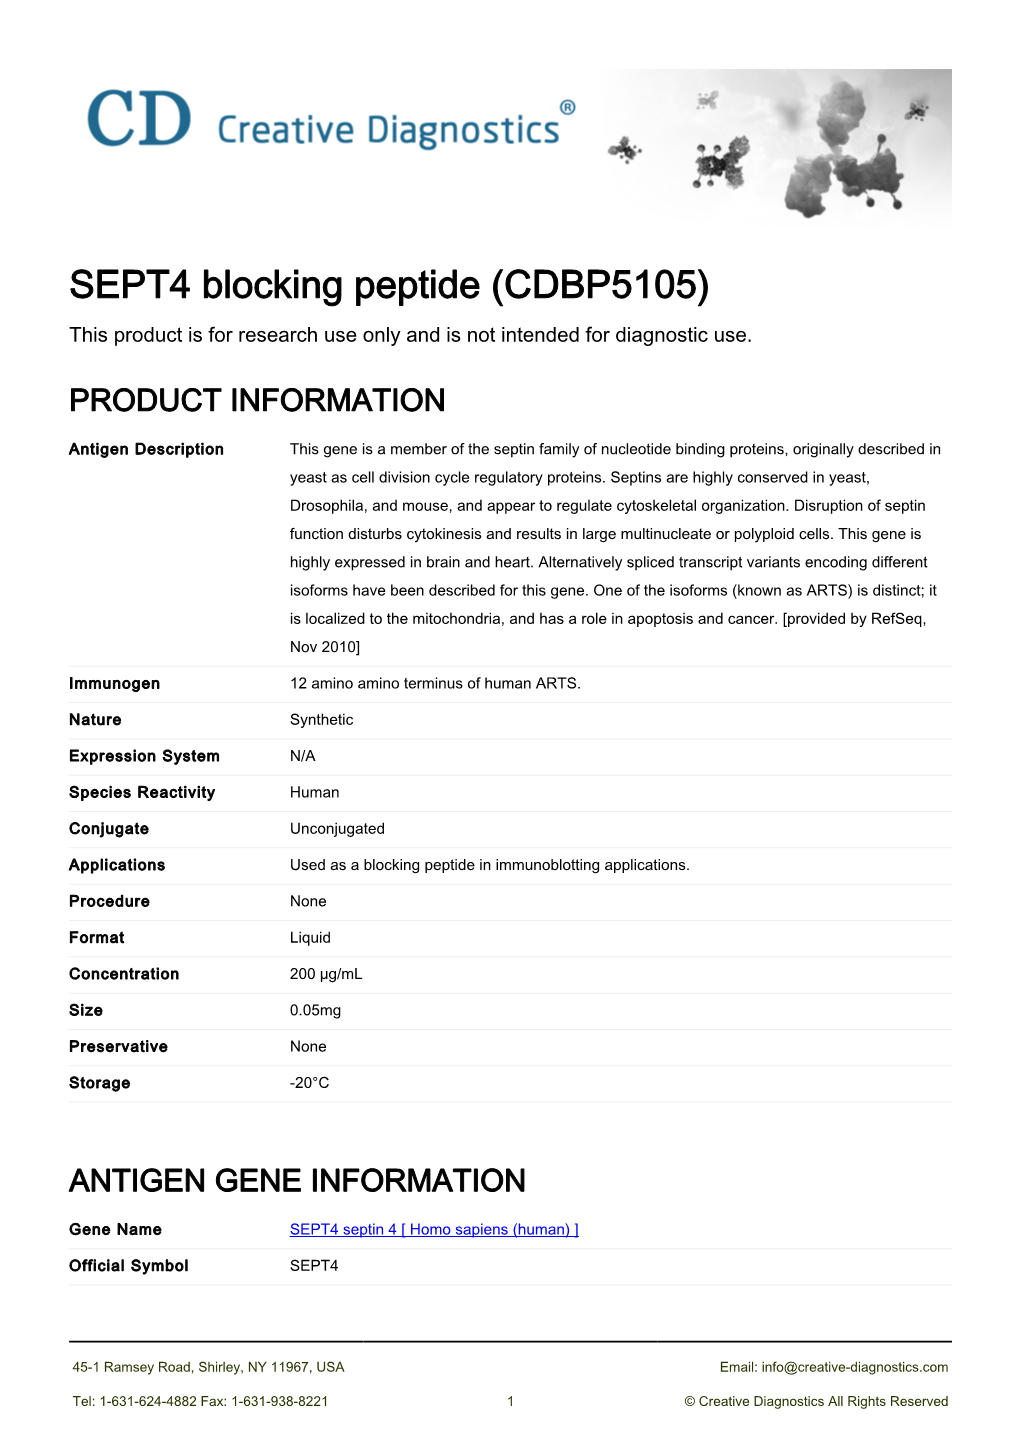 SEPT4 Blocking Peptide (CDBP5105) This Product Is for Research Use Only and Is Not Intended for Diagnostic Use